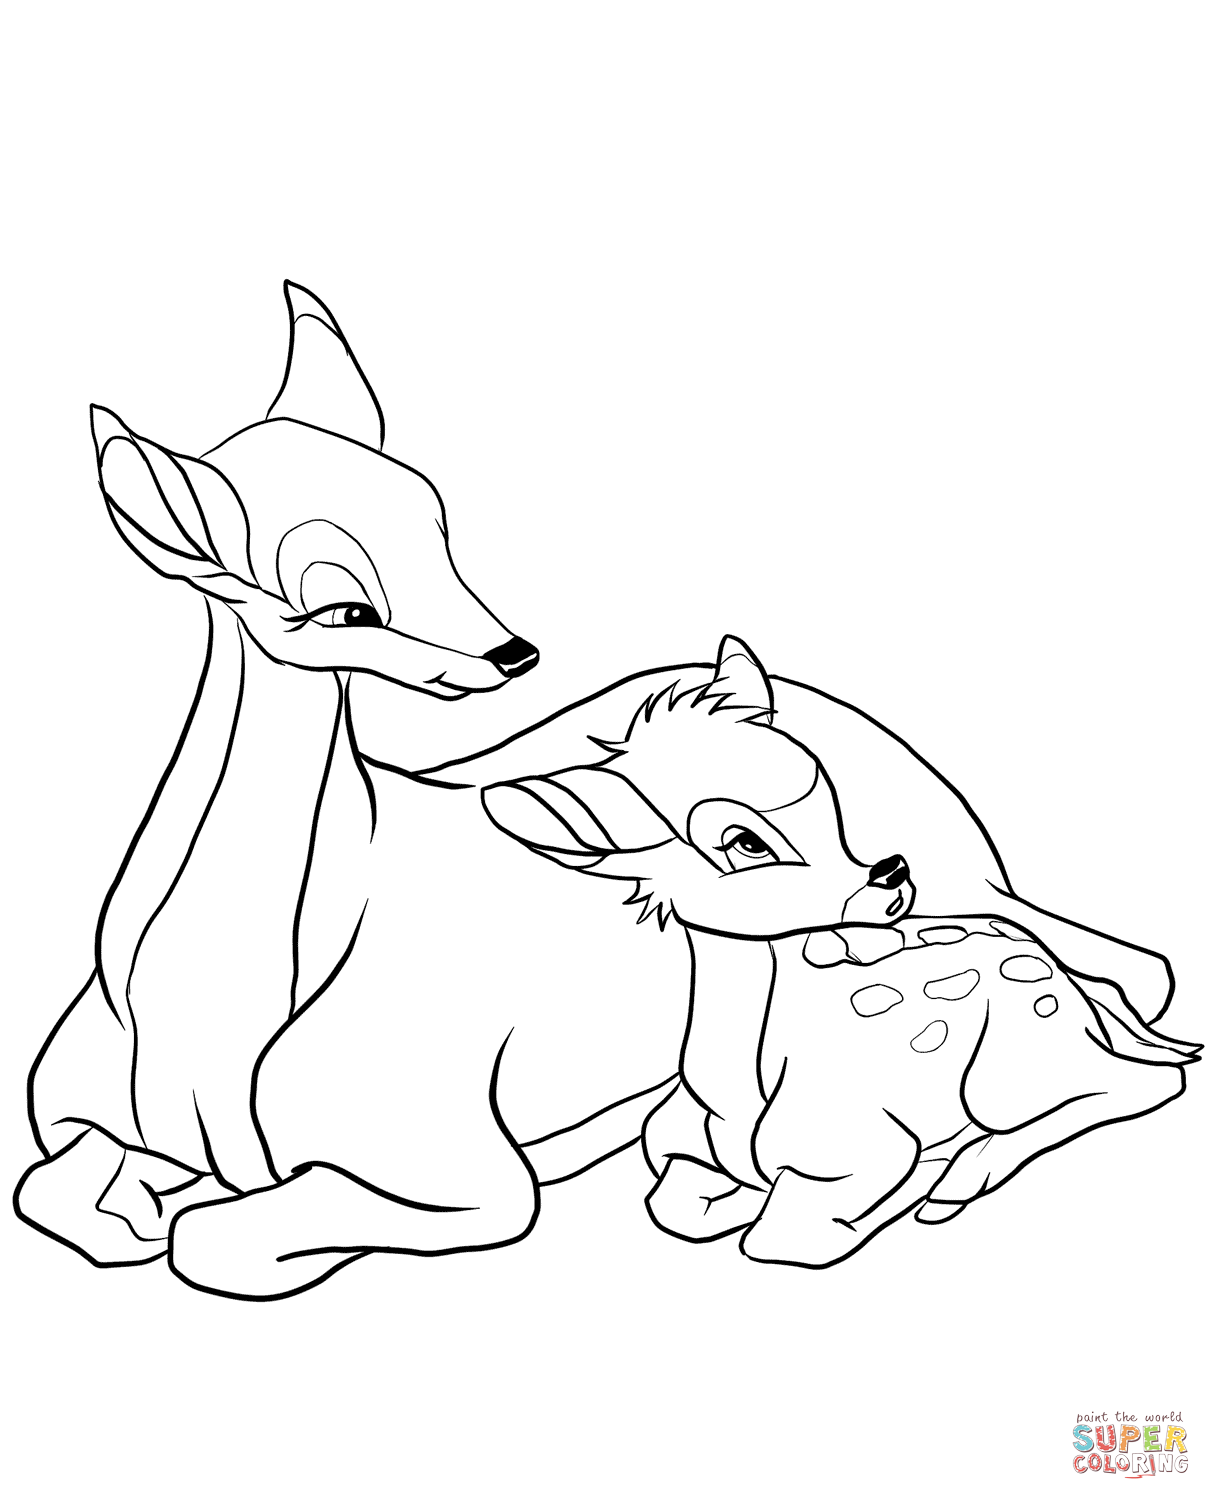 Bambi with His Mother from Bambi from Bambi